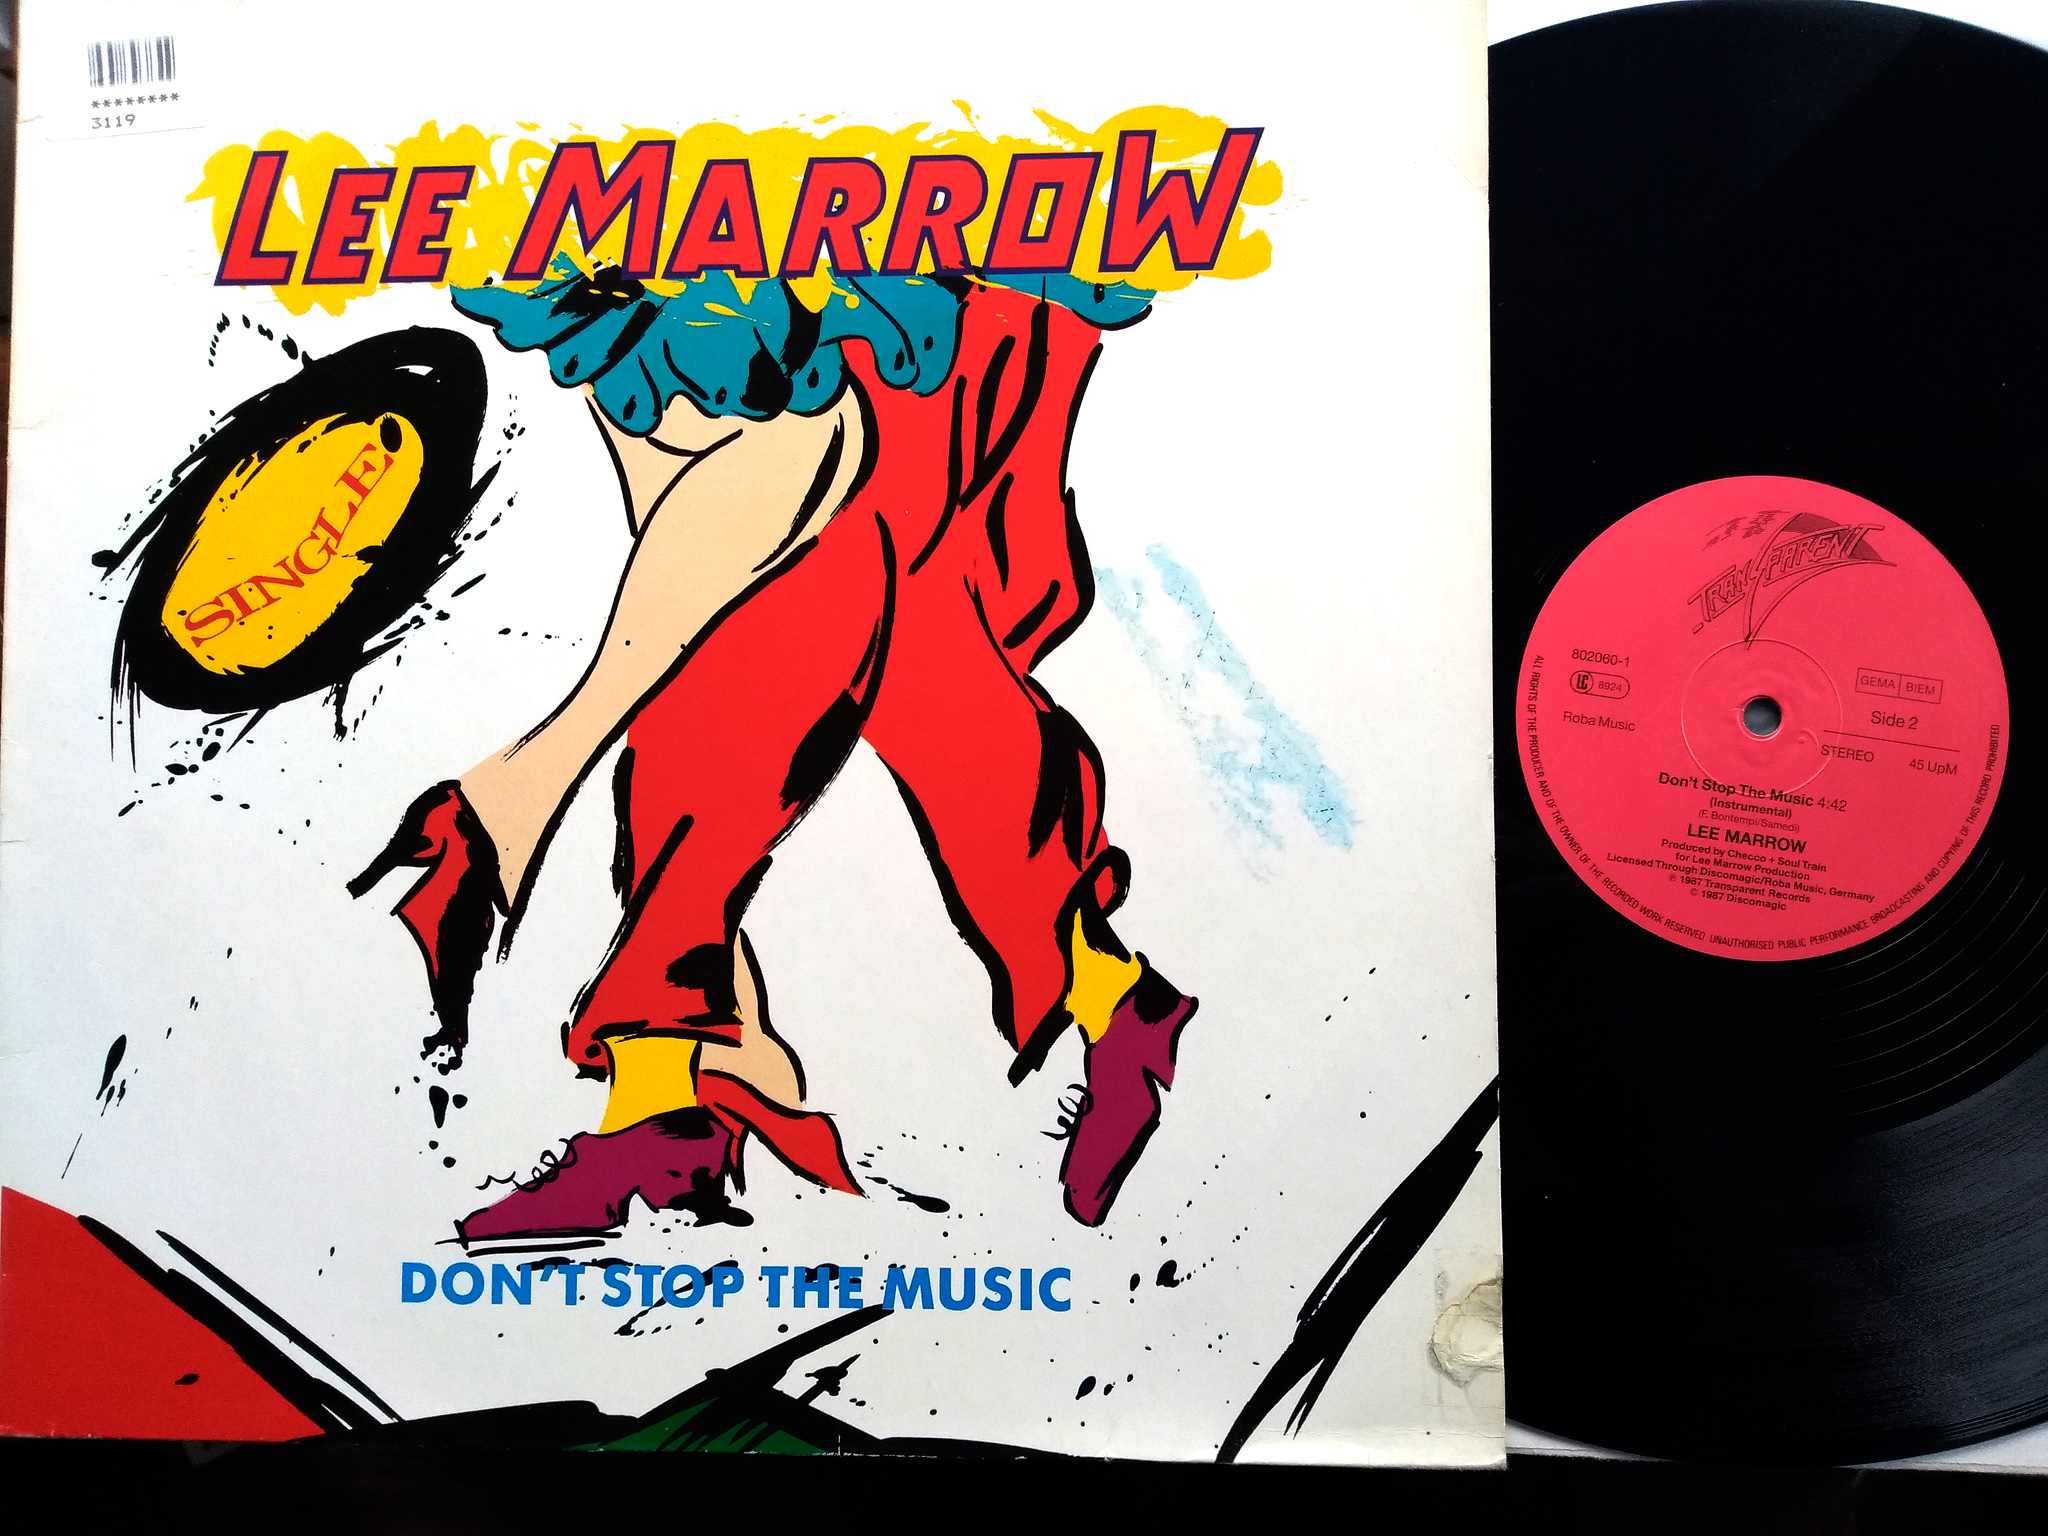 Lee Marrow - Don't Stop The Music